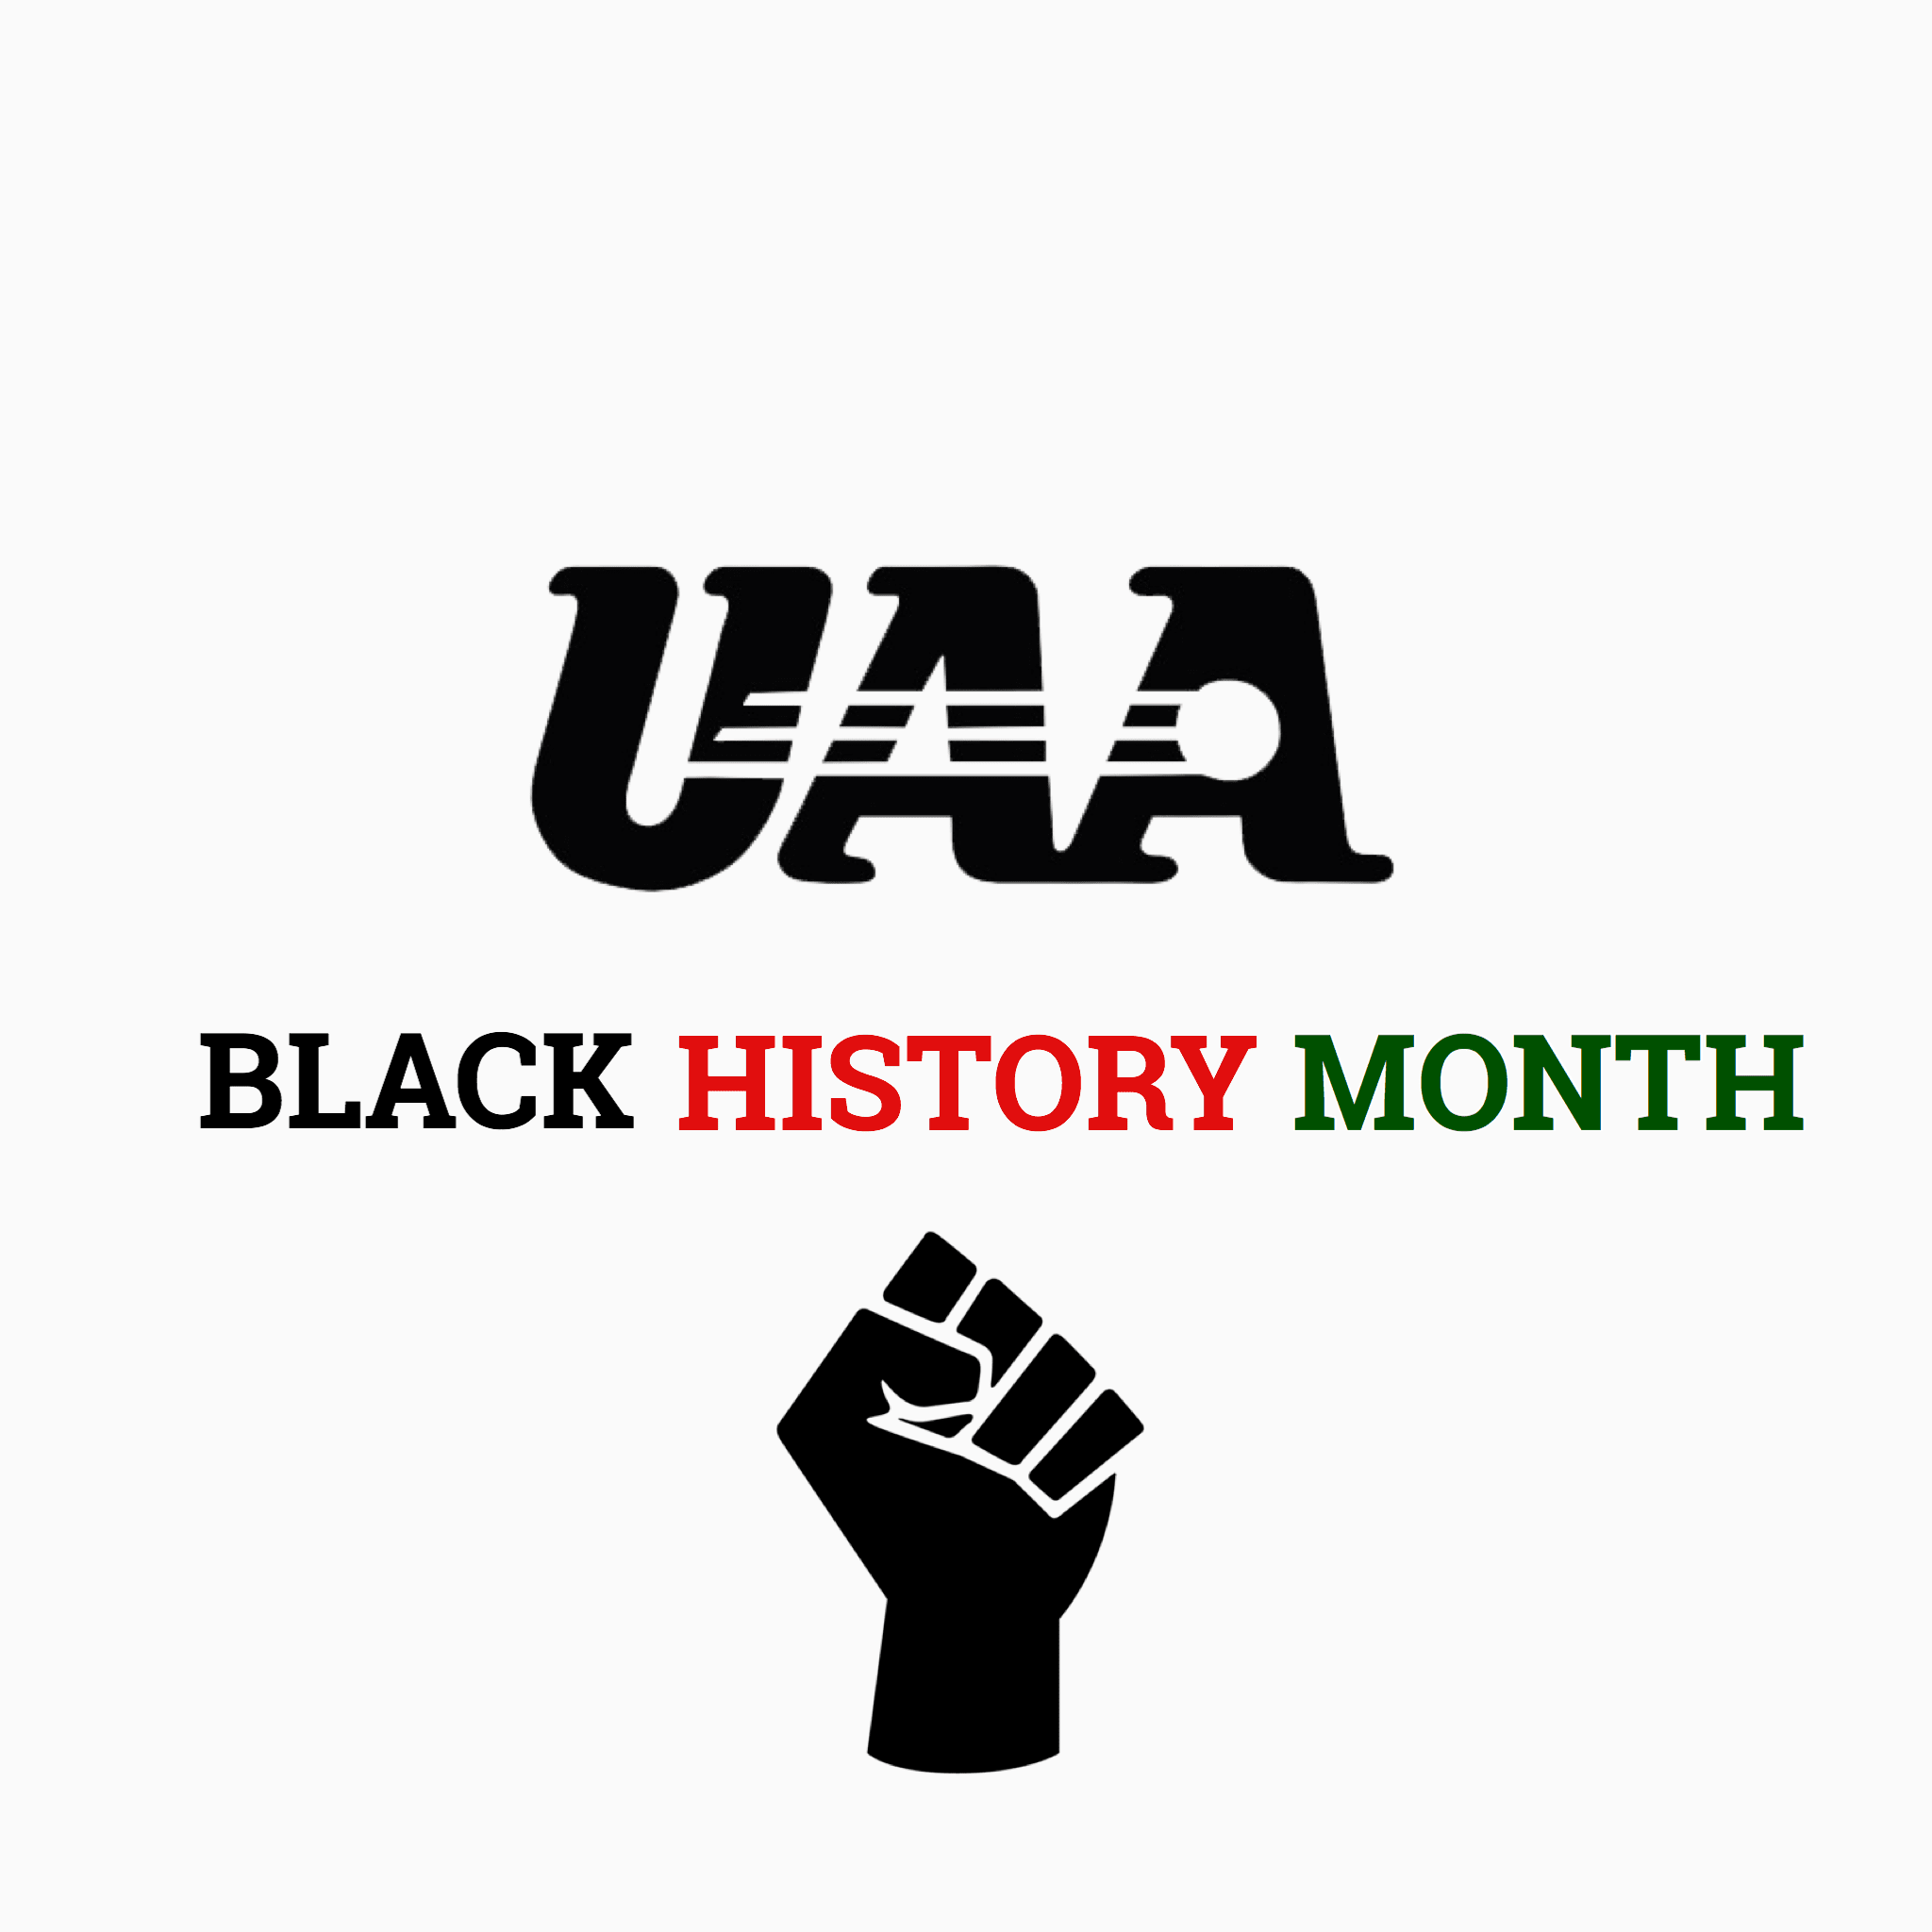 UAA Celebrates Black History Month by Featuring More Than 100 Current and Former Student-Athletes, Coaches, and Administrators